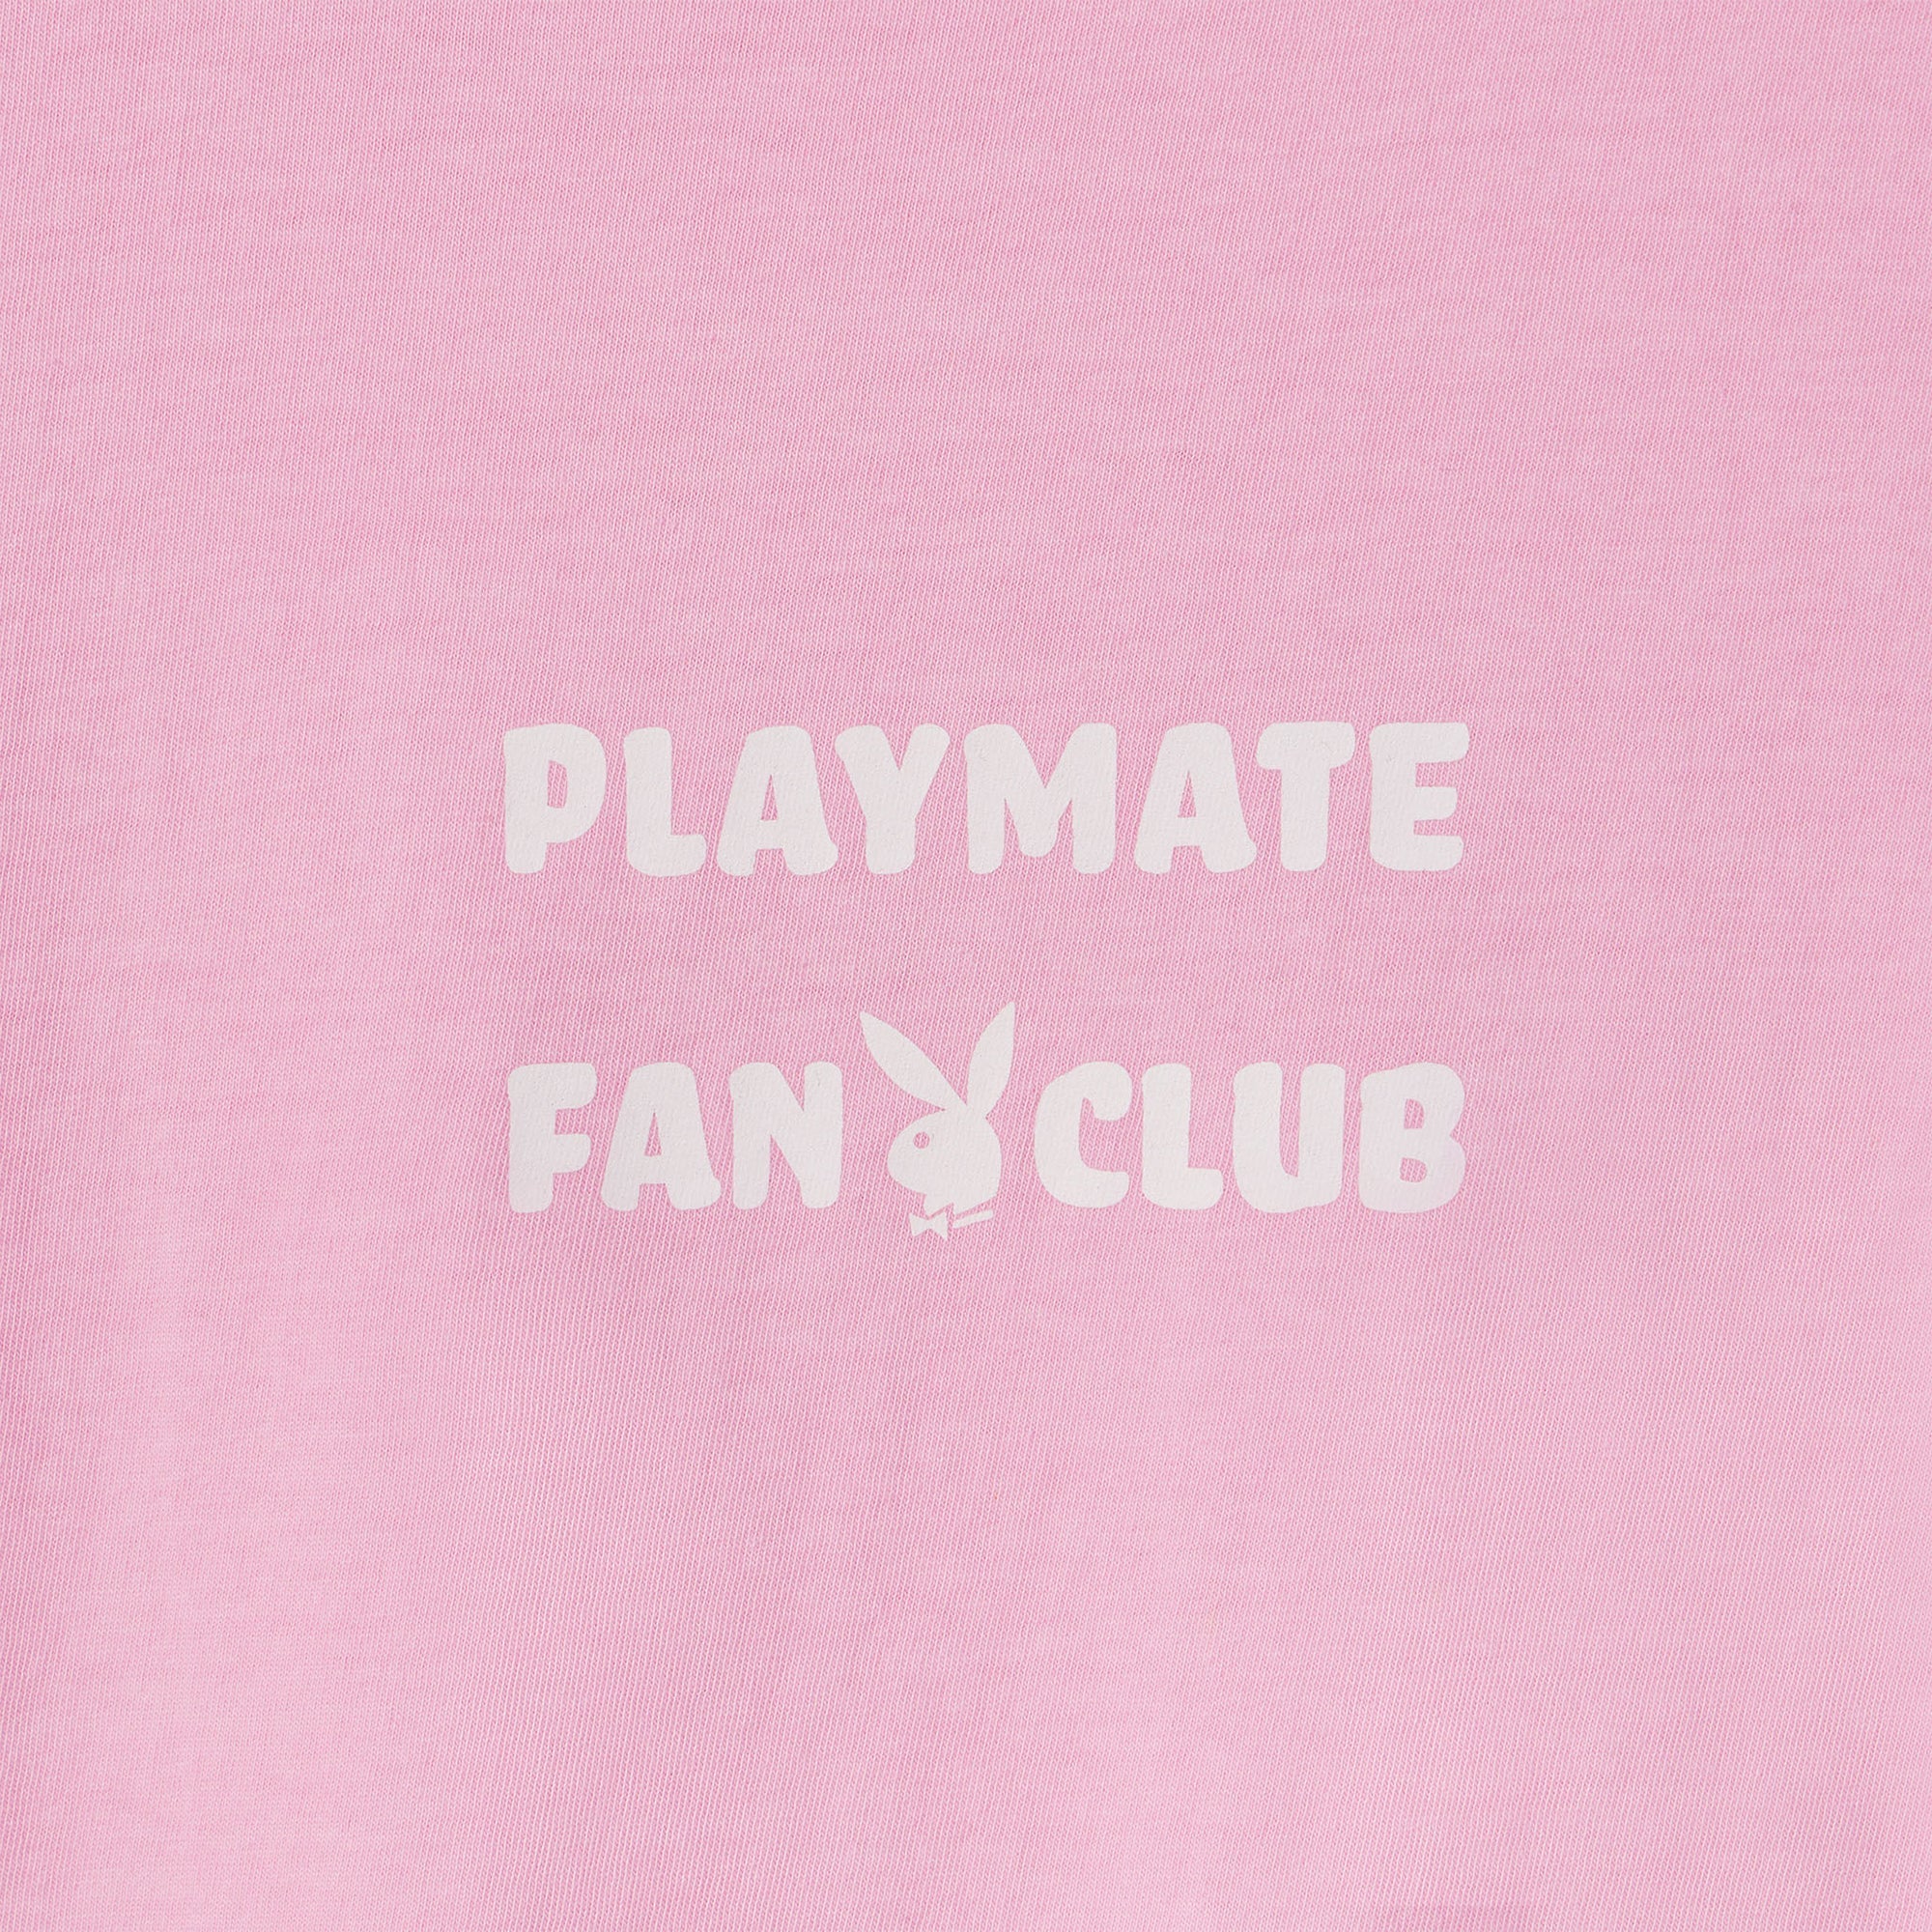 Playmate of the Year Tank - Pink / White Print